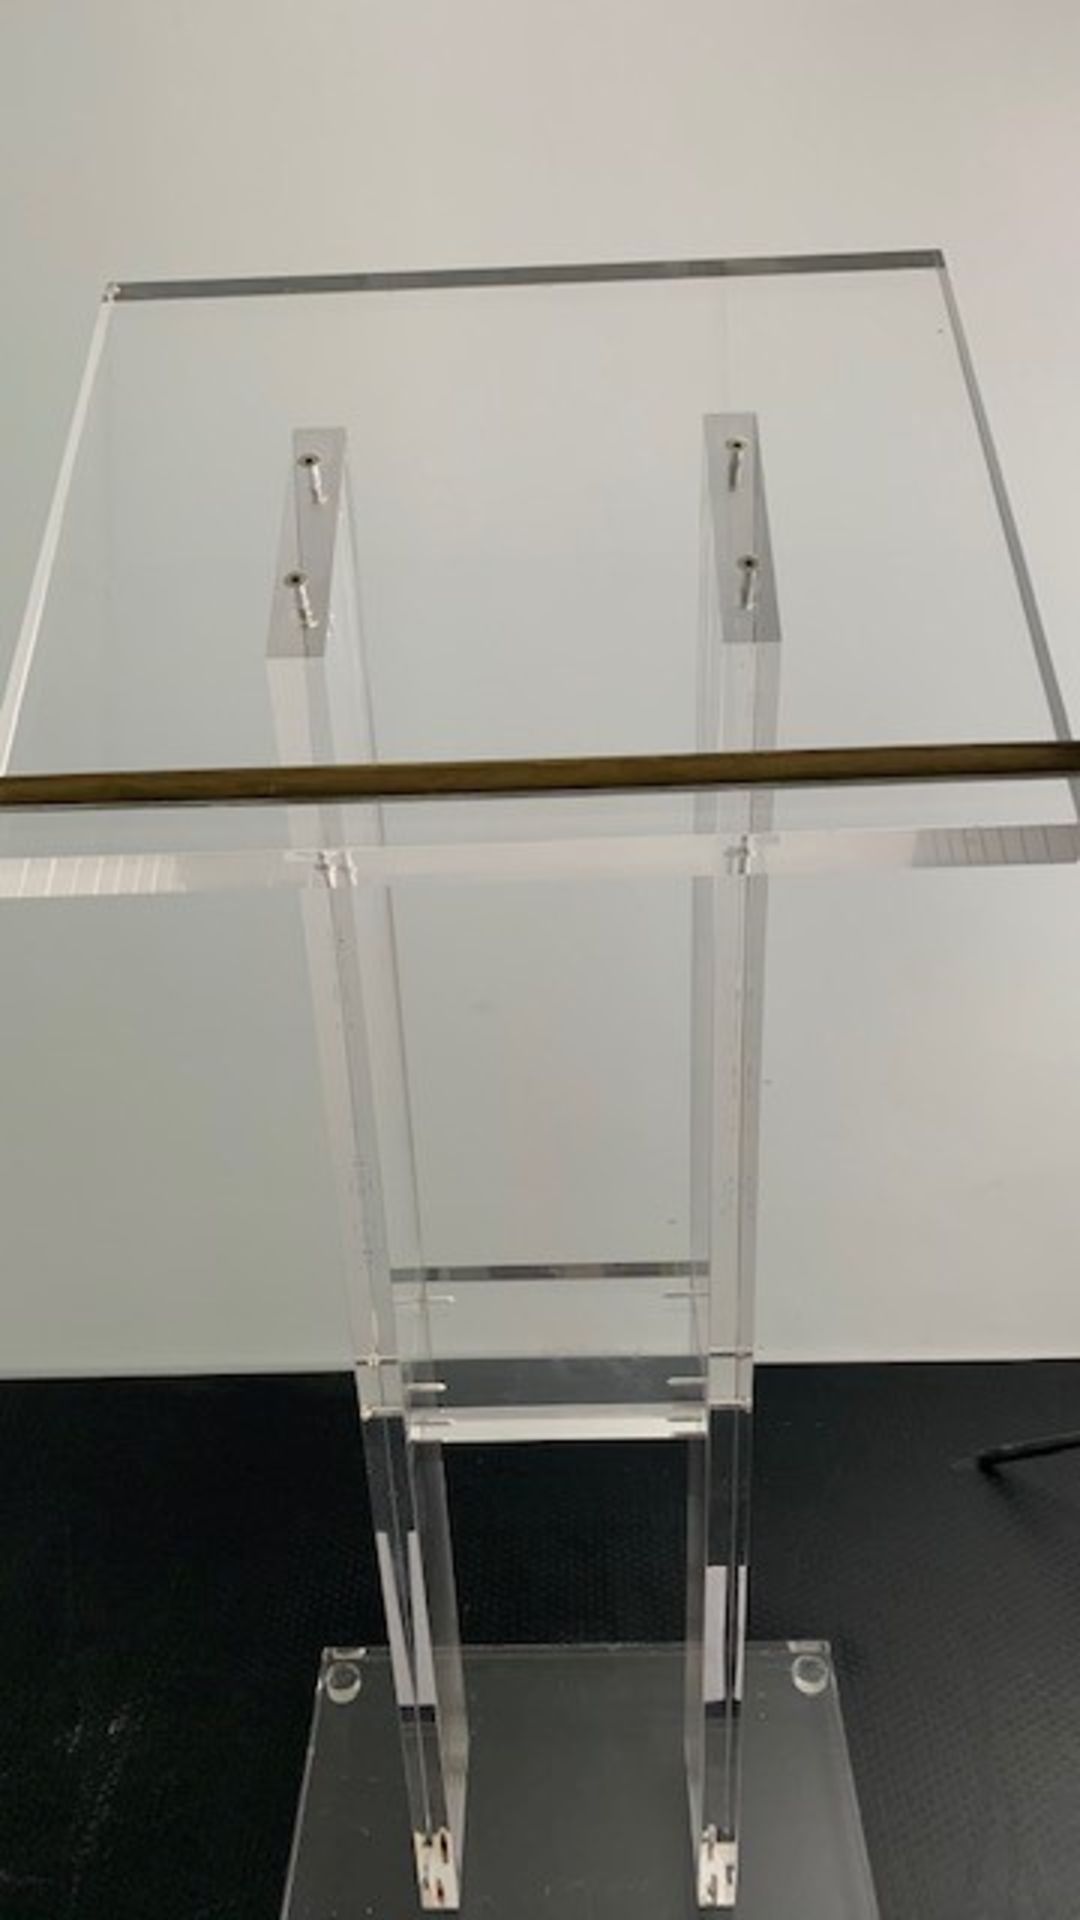 1 x High Quality Perspex Lectern In A Custom Wheeled Flight Case - Ref: 672 - CL581 - Image 2 of 3